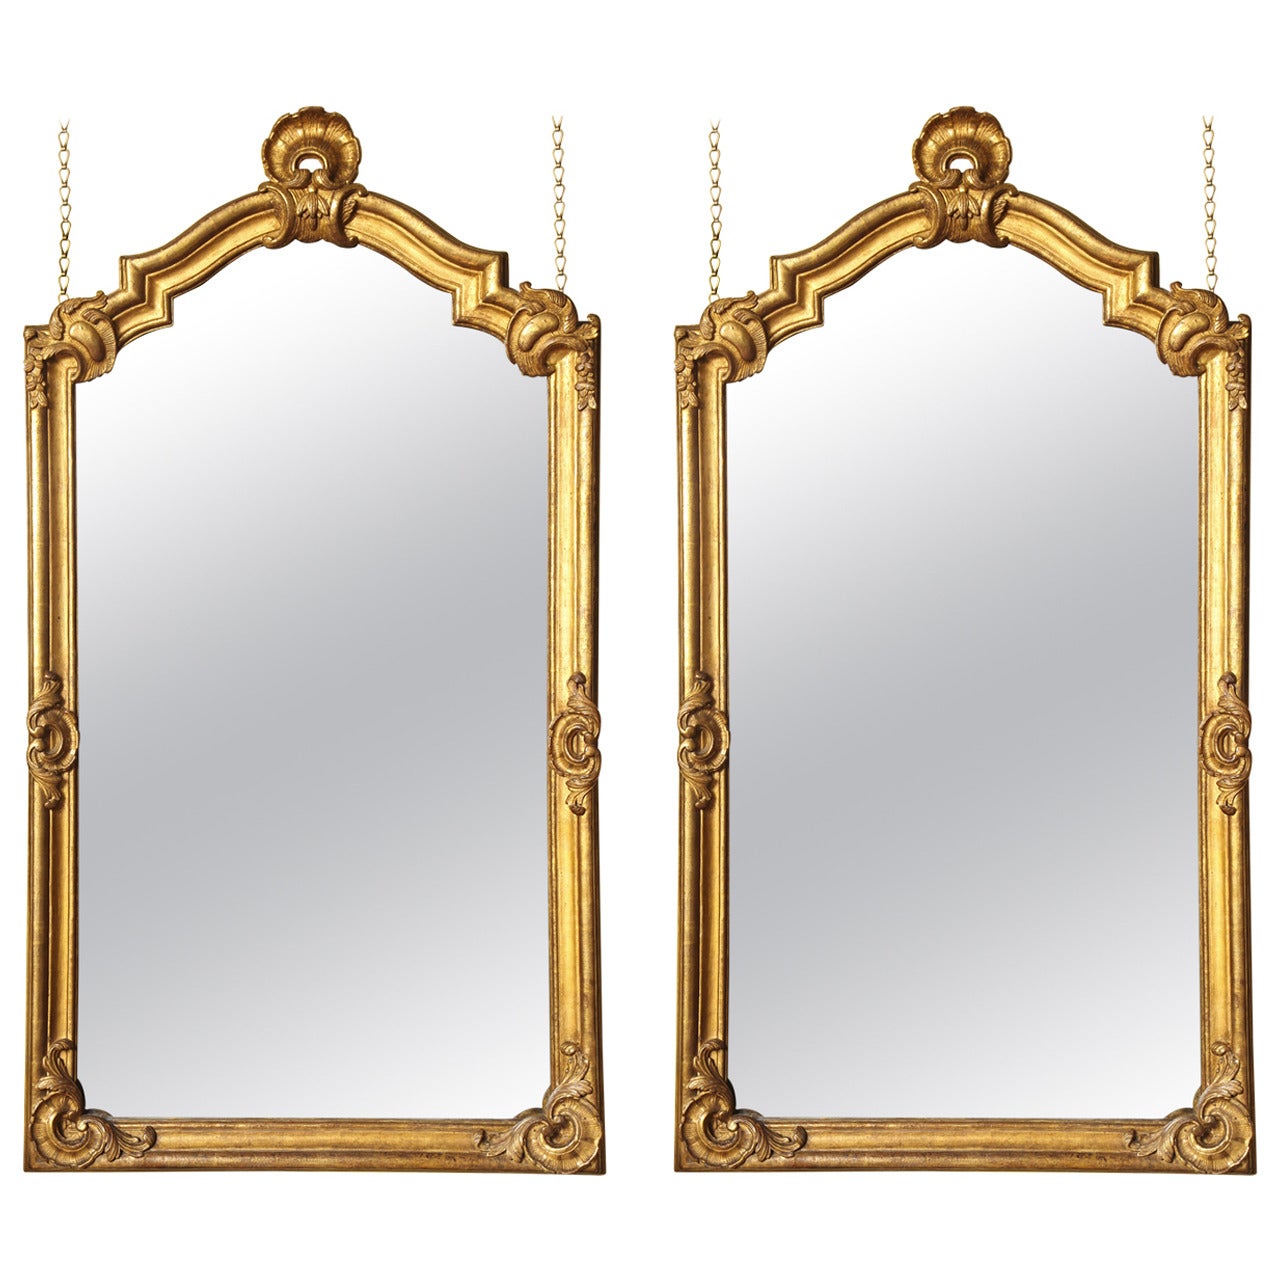 Antique Pair of Large Carved Giltwood Mirrors , French circa 1870